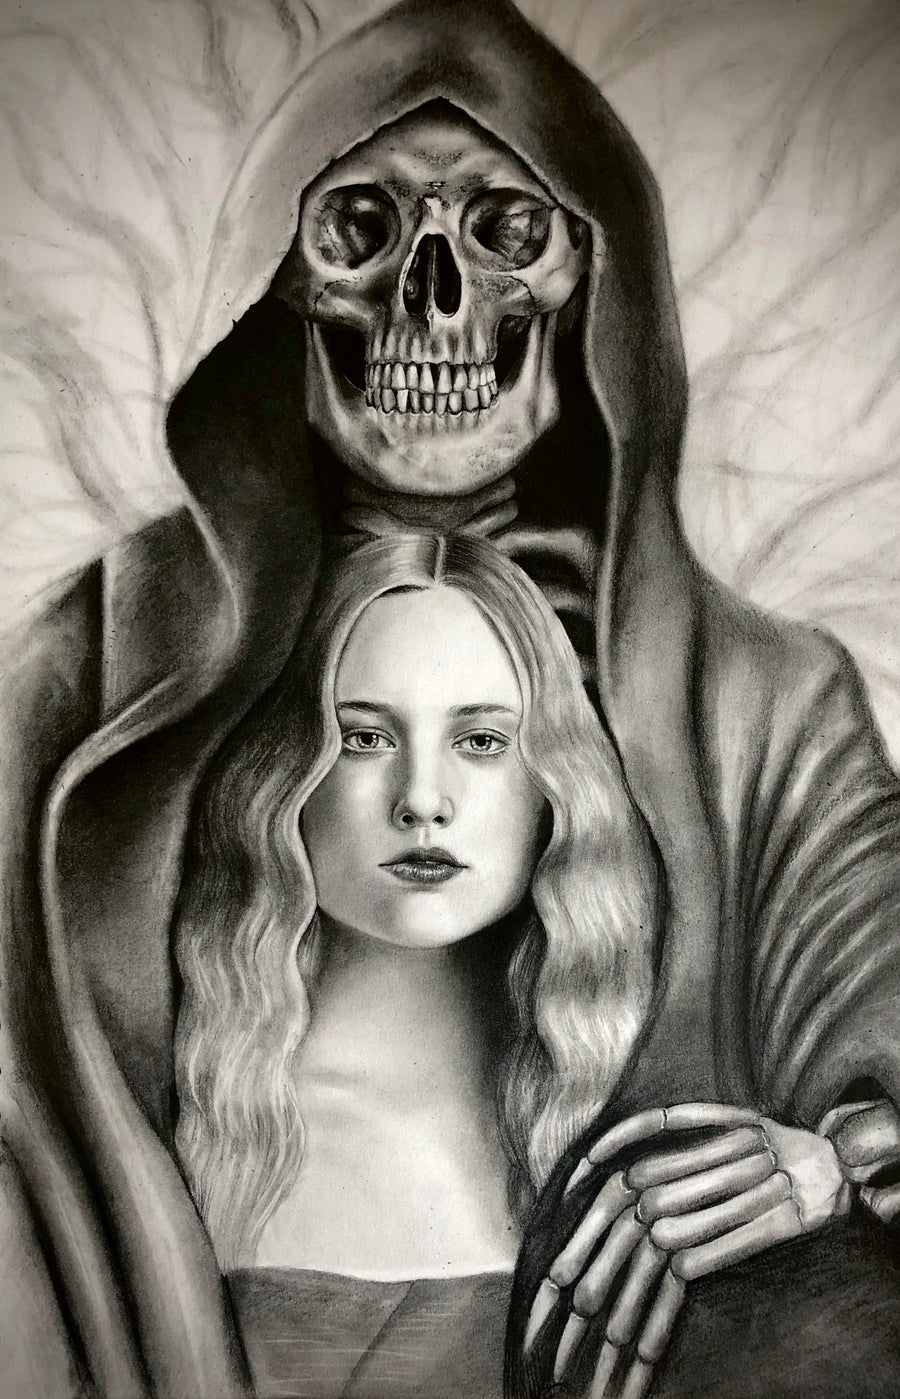 Charcoal drawing of a death - with a skull face and a long black cloak, with their hand on the shoulder of a young woman with blonde hair.